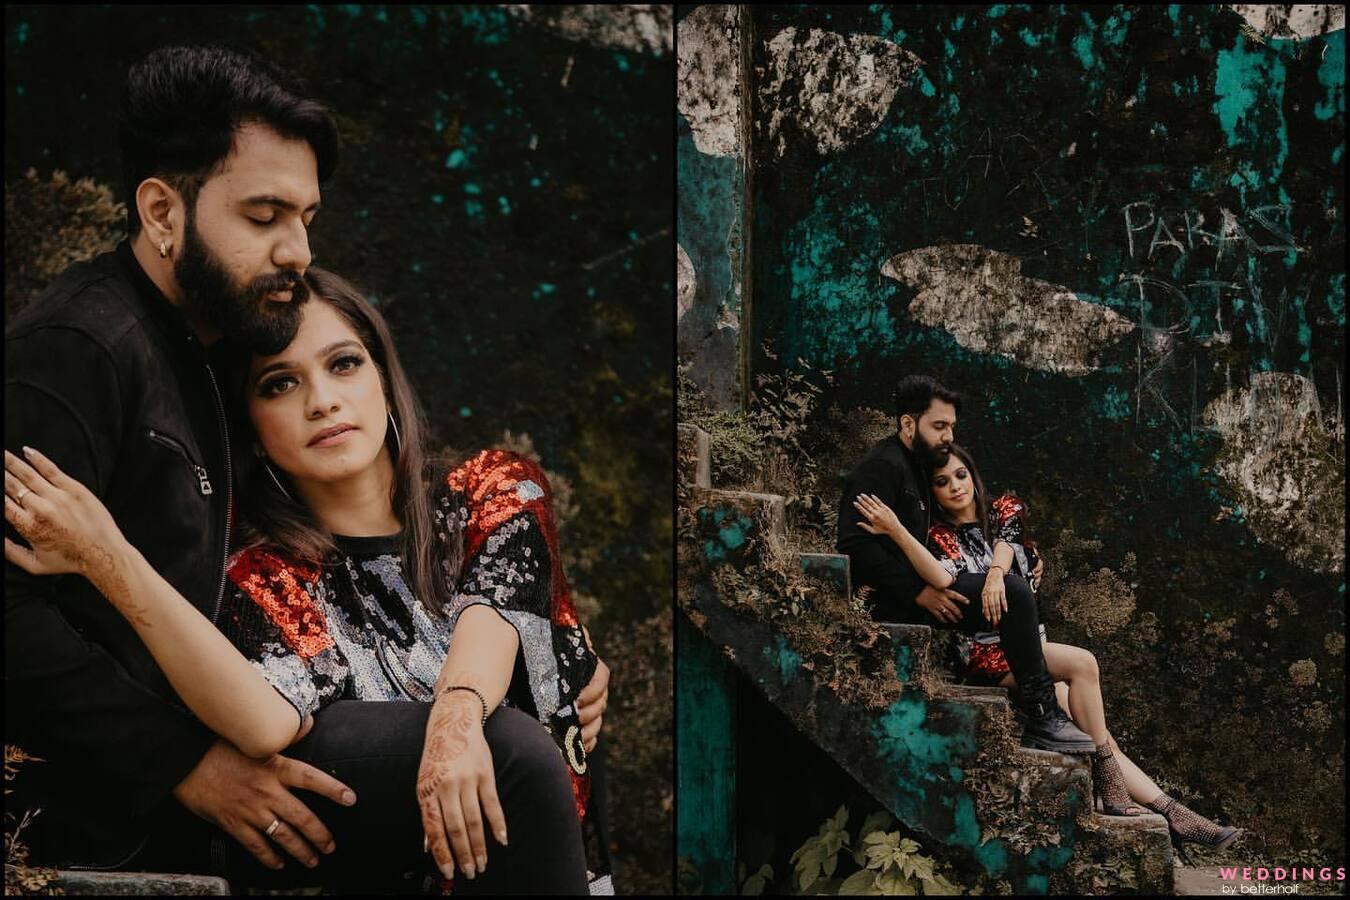 City couples cuddle up, pucker up and get close for that intimate shoot -  Times of India